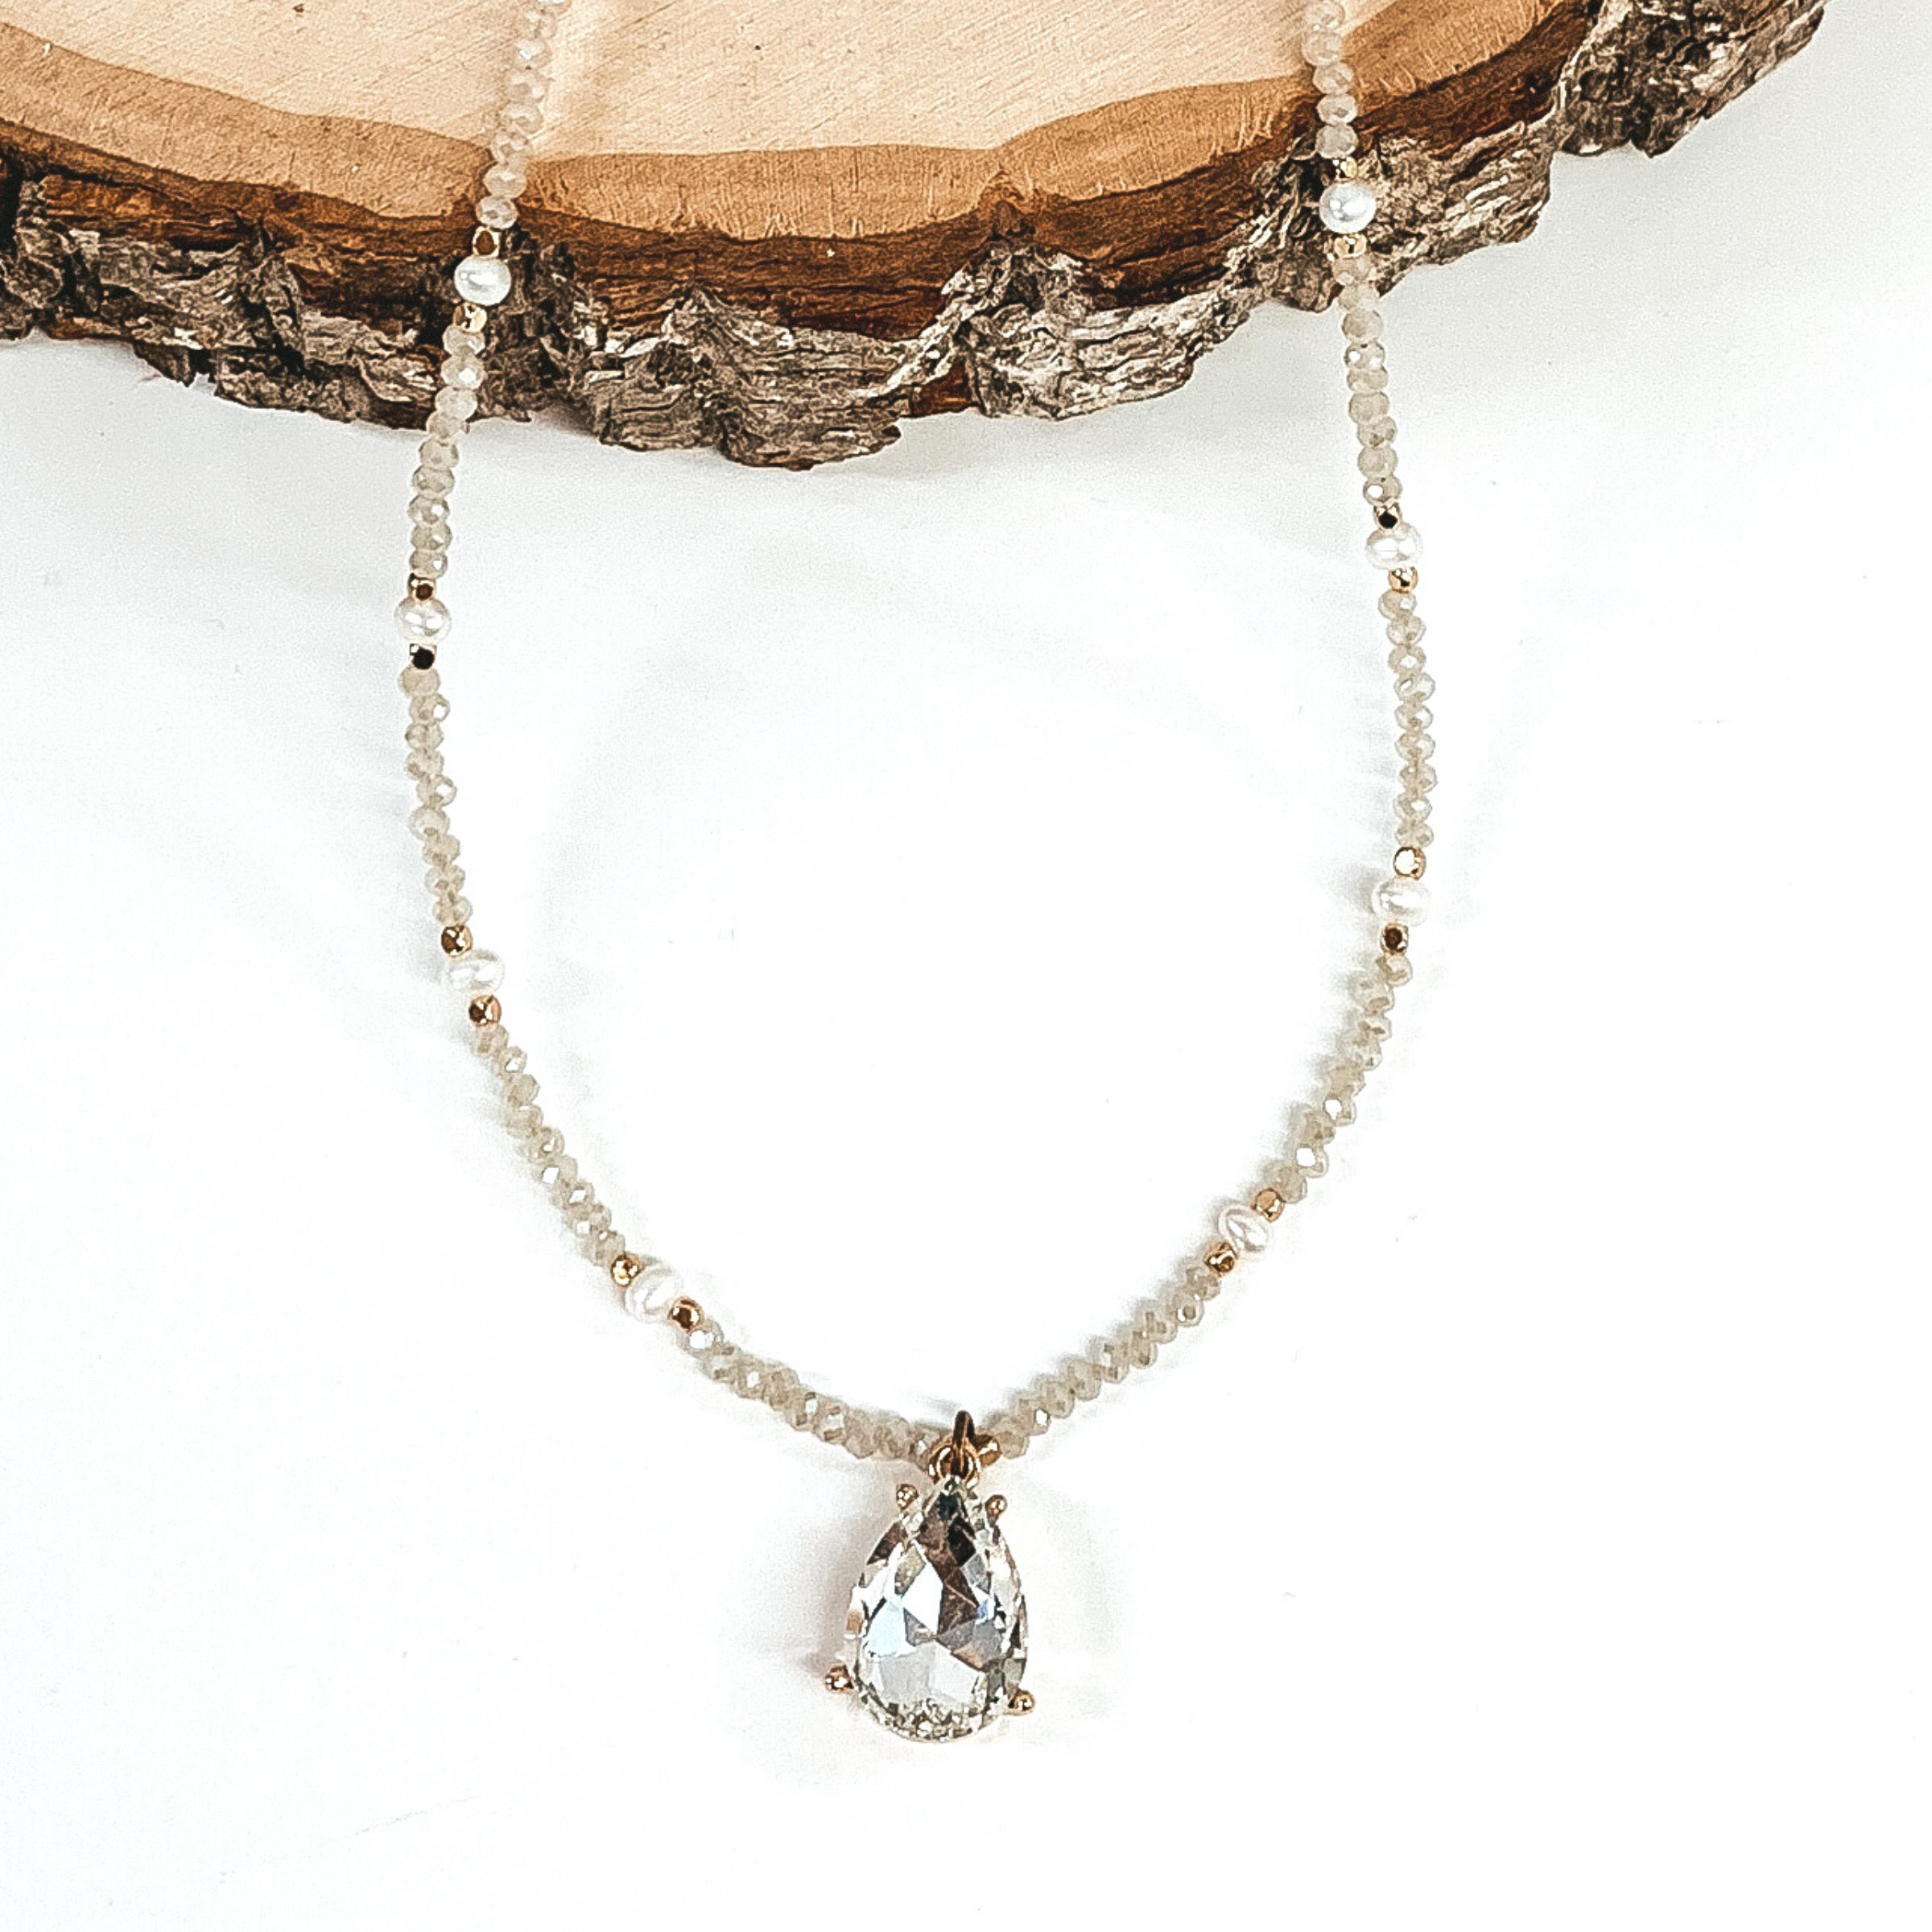 Clear crystal beads, white pearls, and gold beaded necklace with a clear teardrop crystal. This necklace is pictured on a white background with  wood at the top.